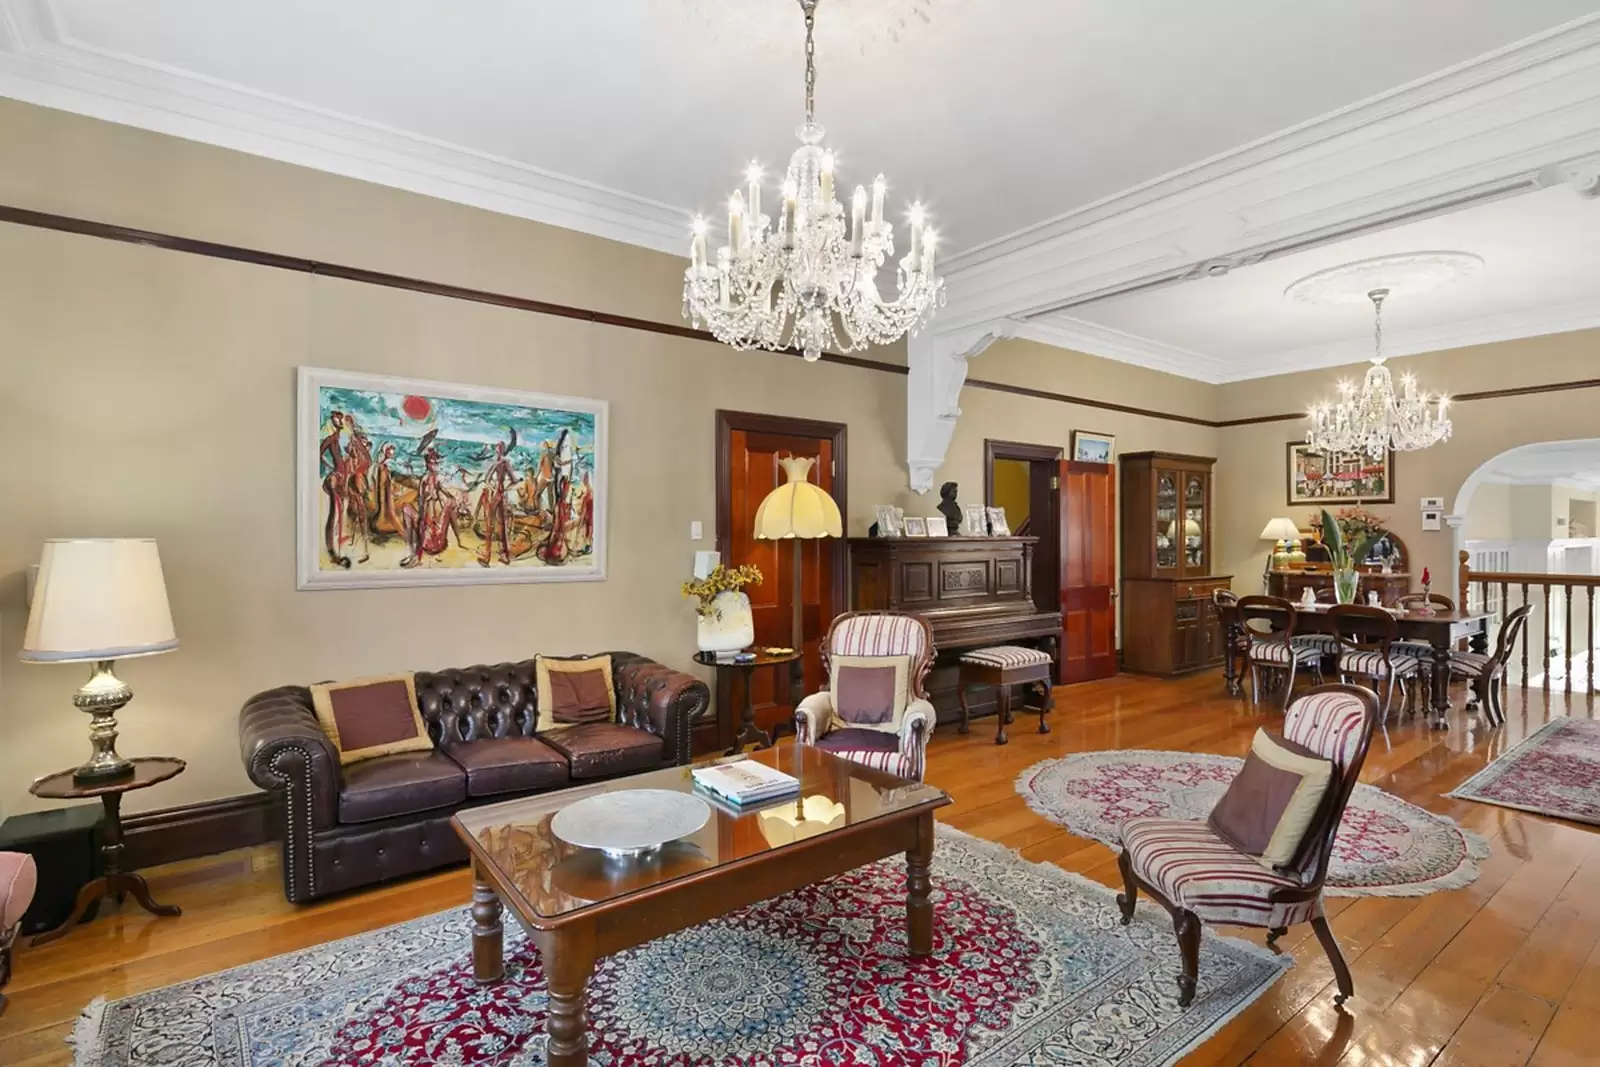 Photo #5: 88 Old South Head Road, Woollahra - For Sale by Sydney Sotheby's International Realty